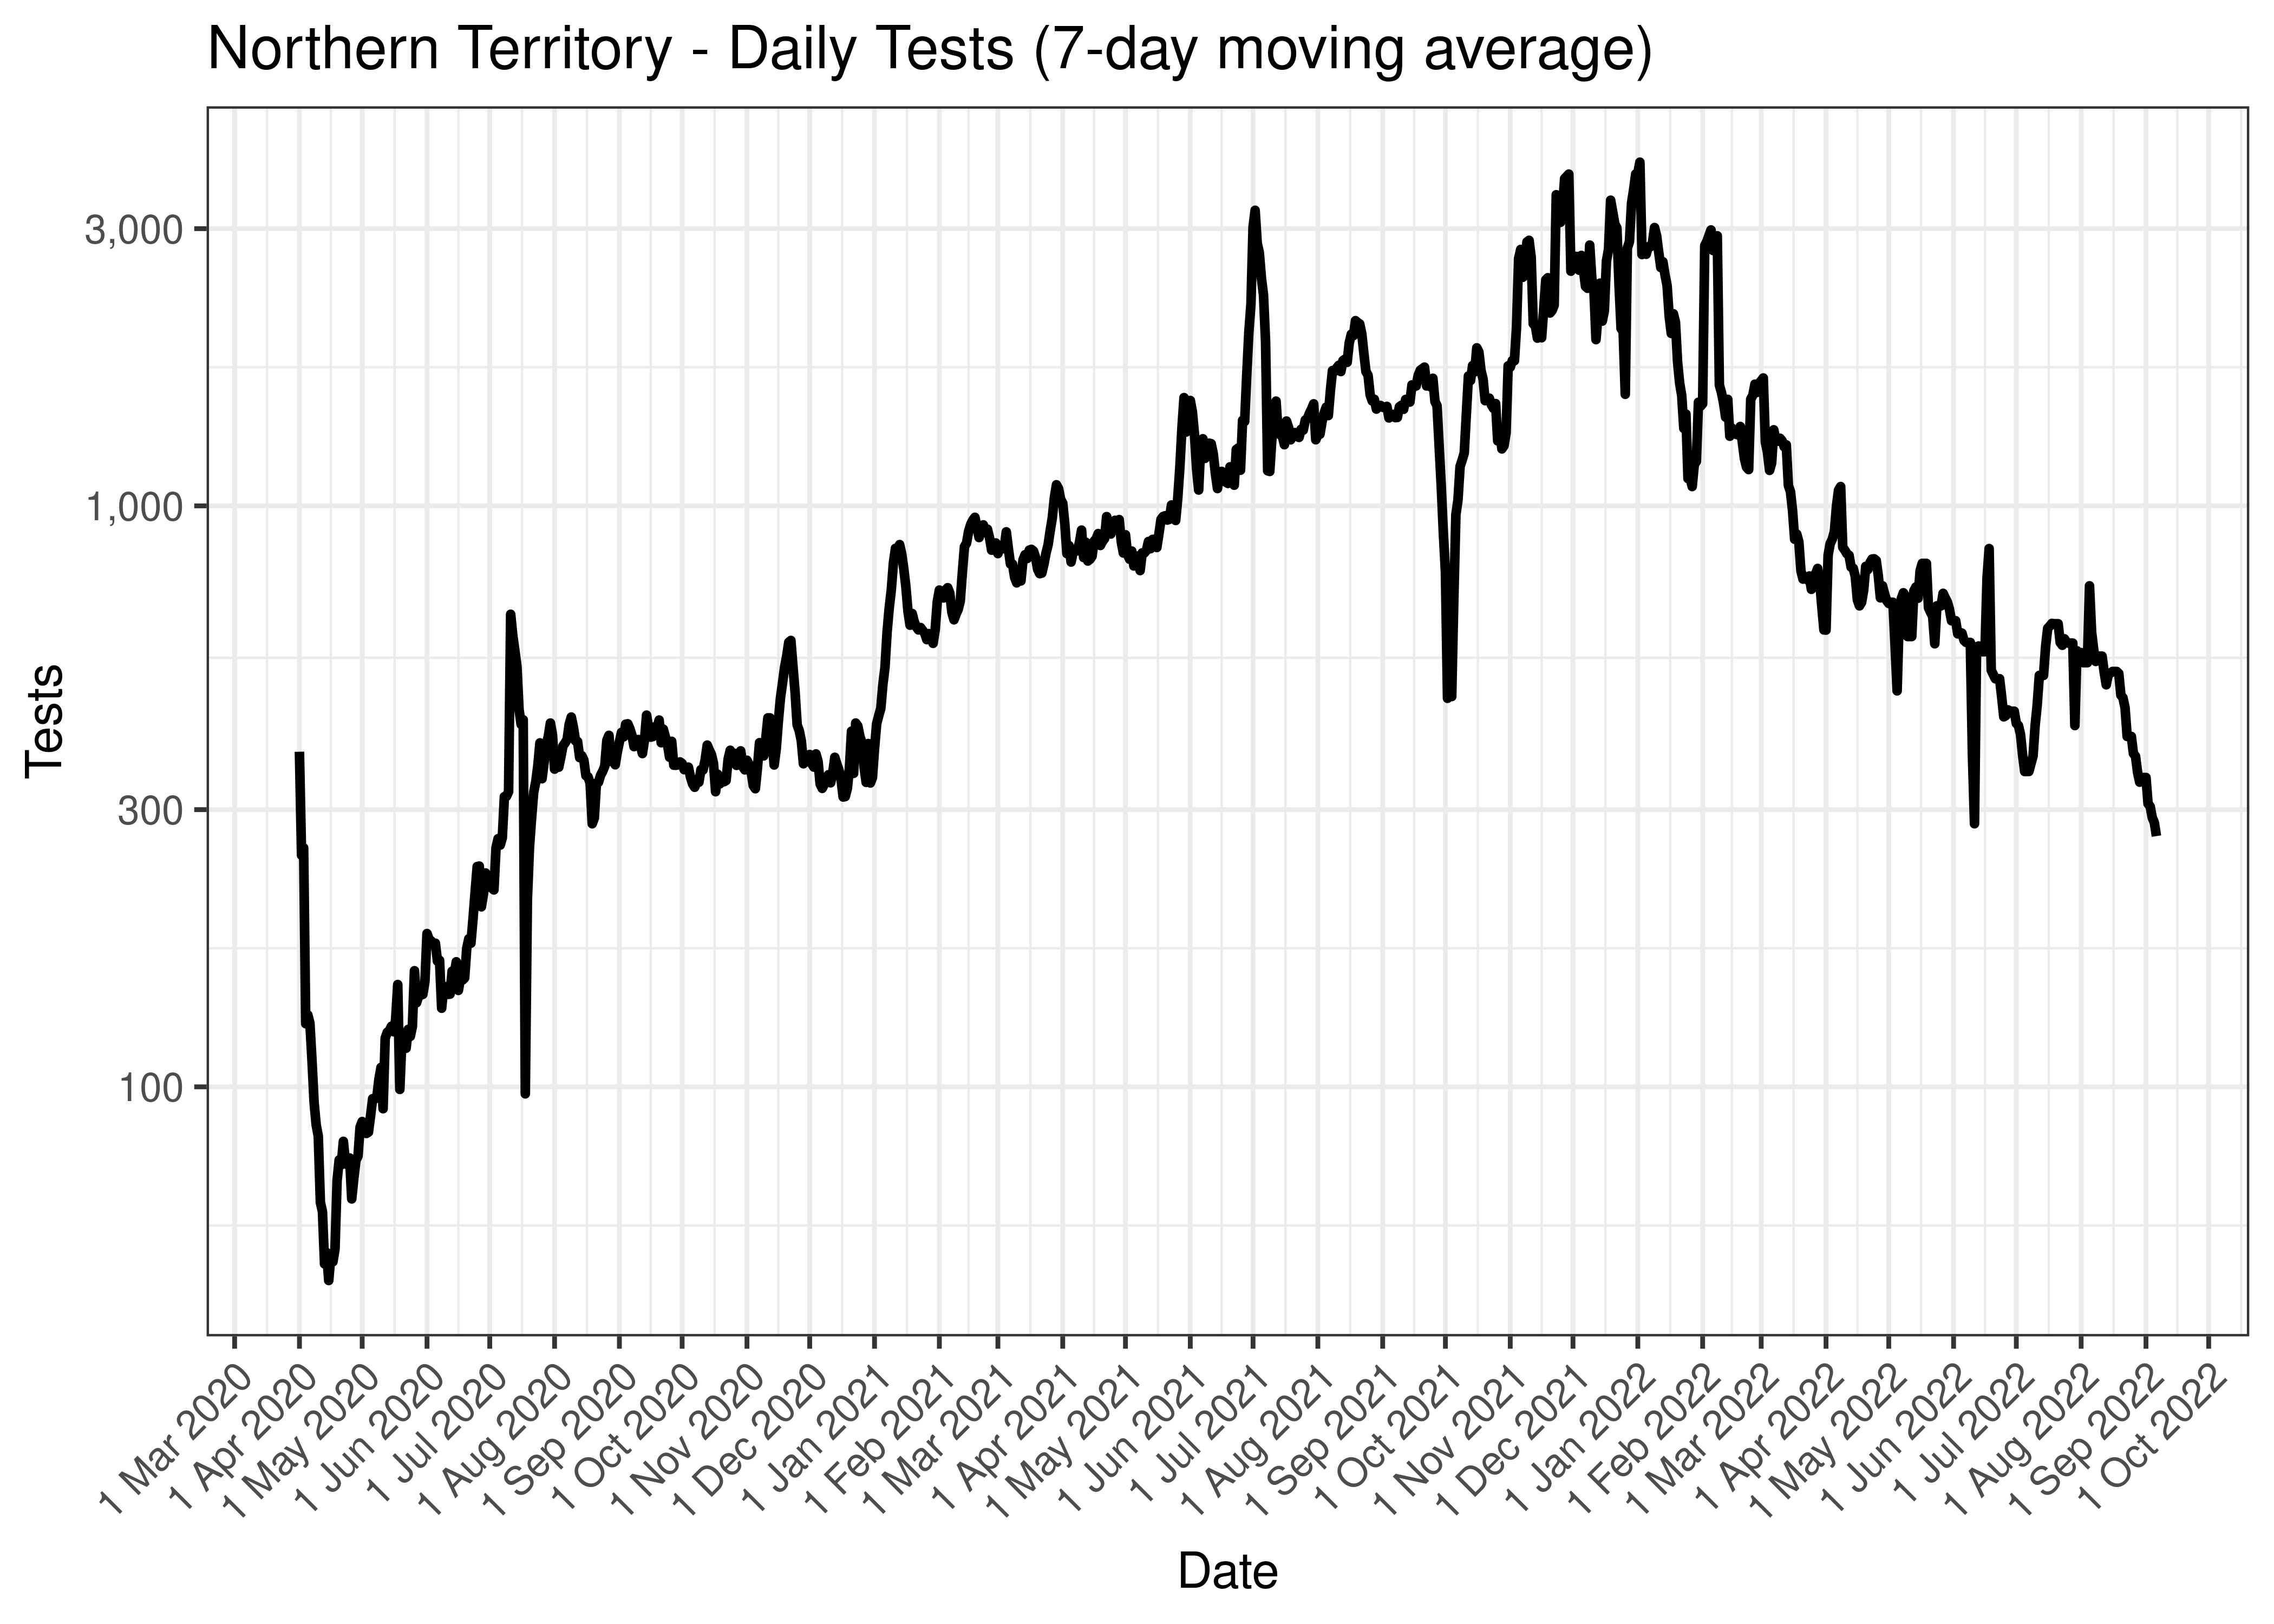 Northern Territory - Daily Tests (7-day moving average)